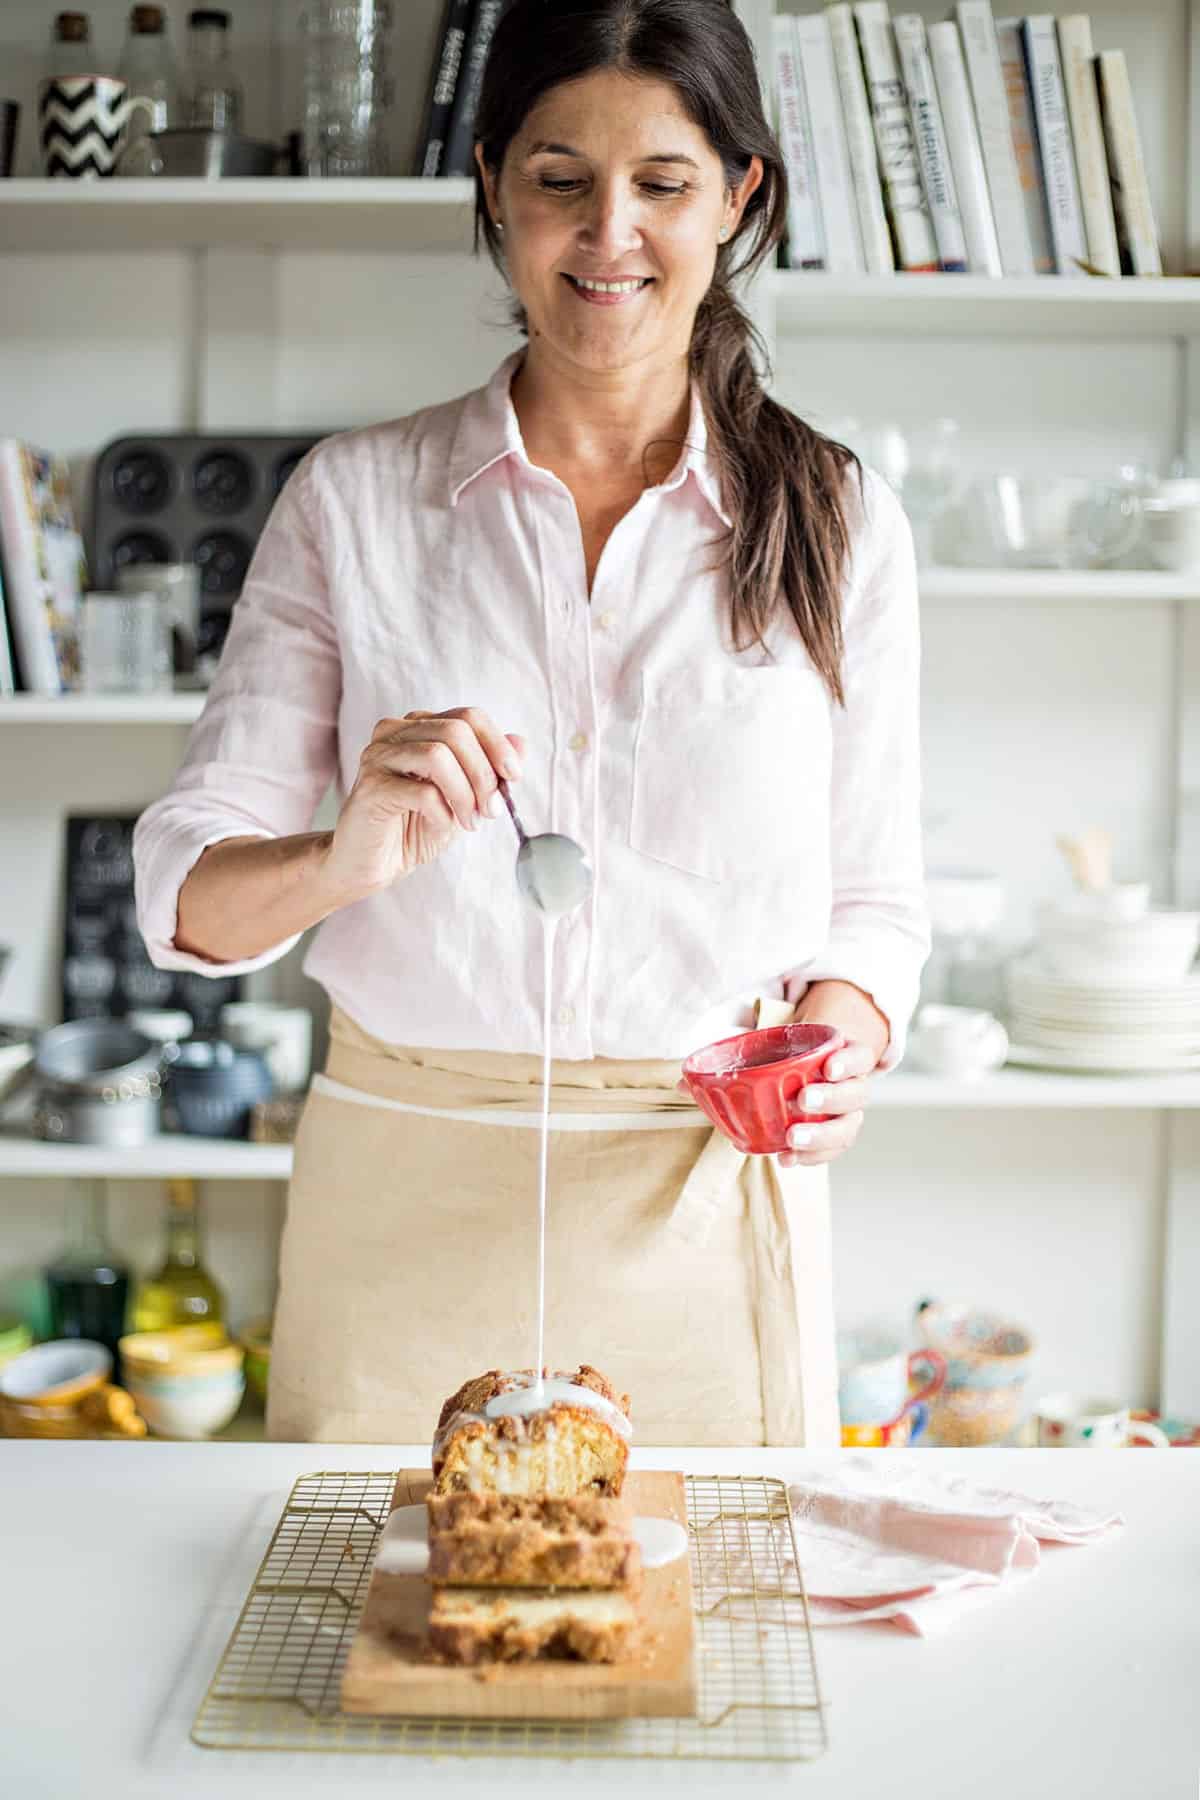 Woman with pink shirt and brown apron glazing loaf coffee cake, prop library as background